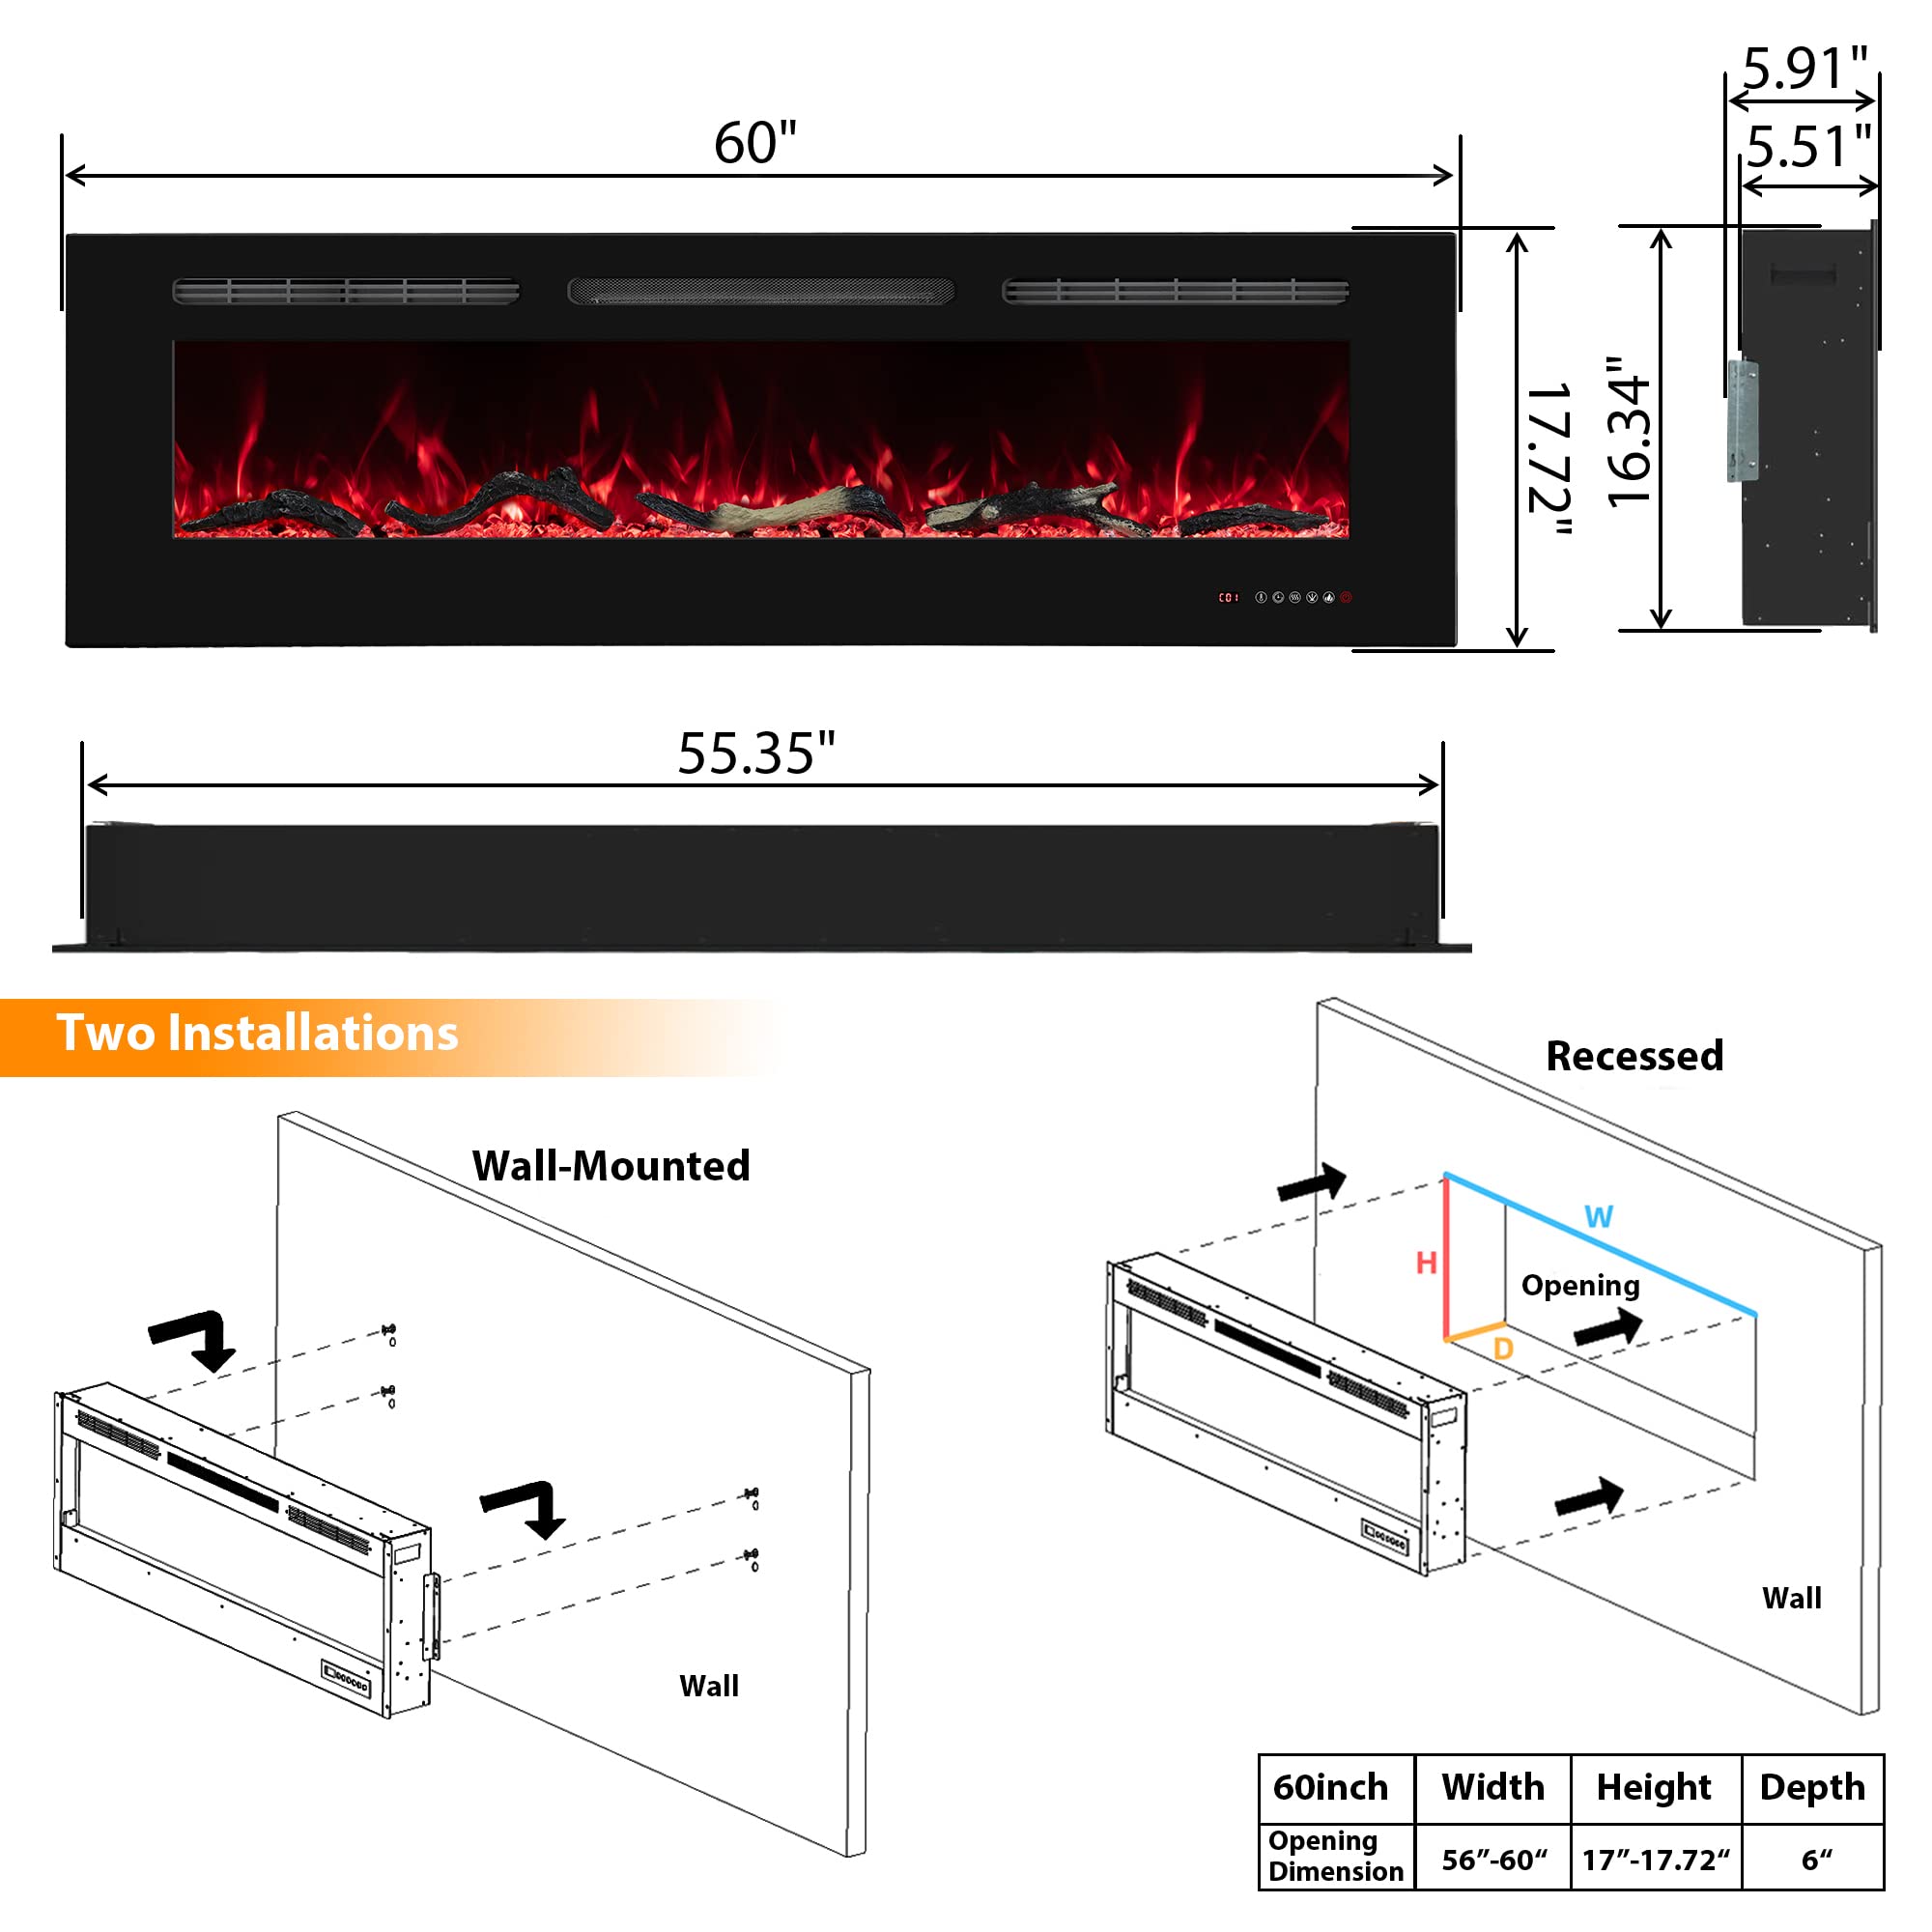 Oxhark Flame Electric Fireplace 60 inch Wide, Wall Mounted Fireplace Inserts Electric Heater, 13 * 13 Flame Effects Like Real Flame, Low Noise, Timer & Thermostat Setting, 750W/1500W, Black